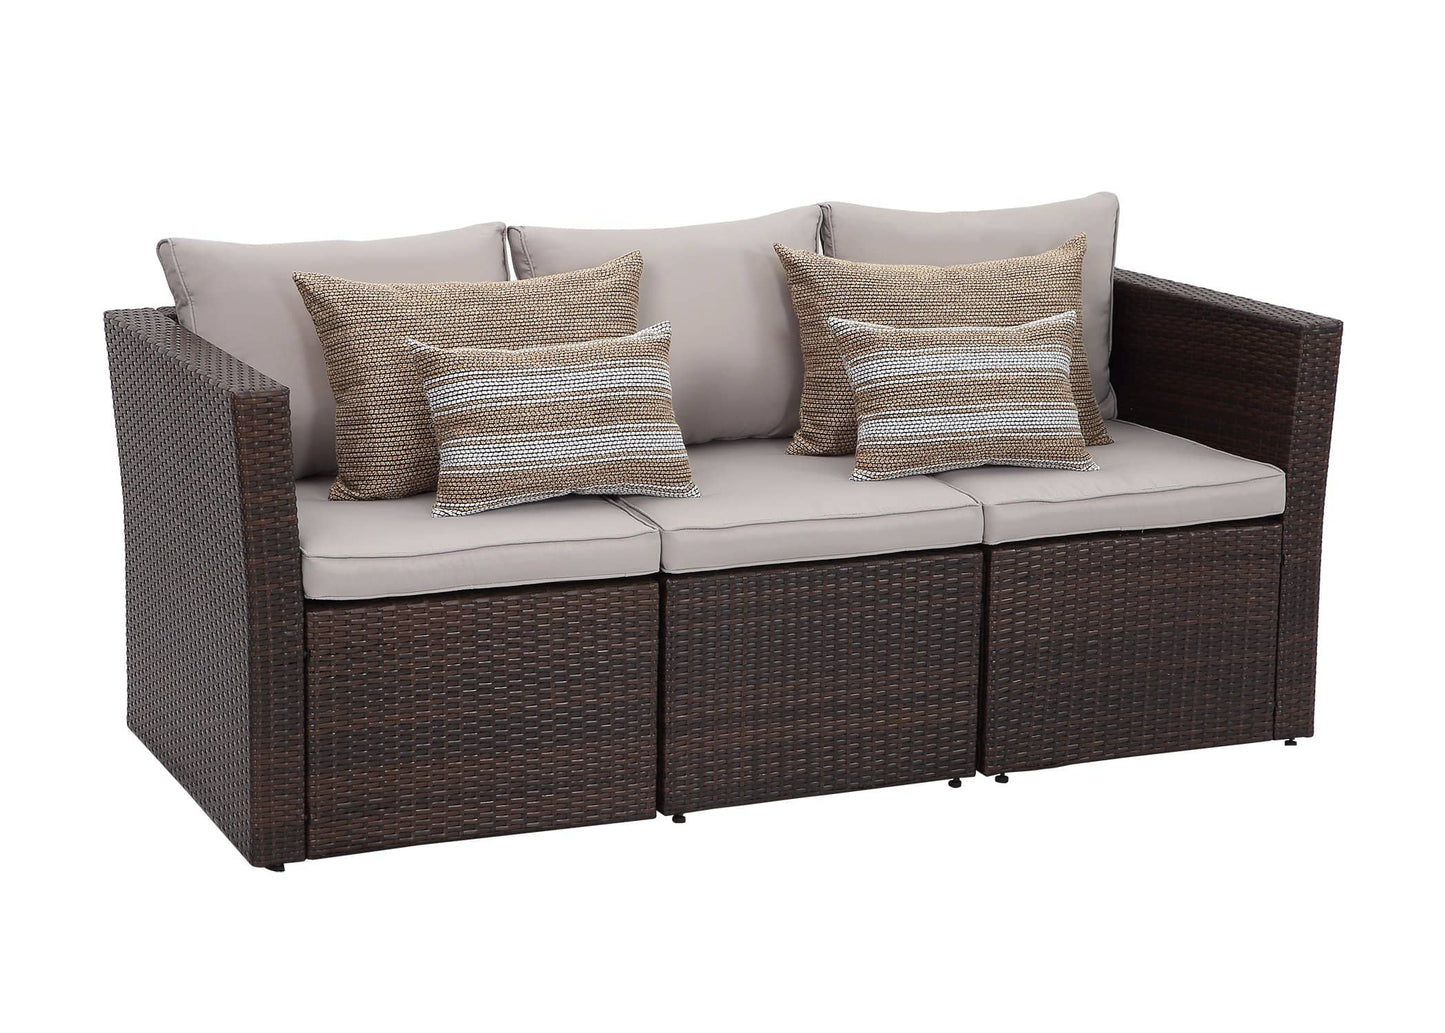 Context Brisk 6 Piece All Weather Wicker Sofa Seating Group with Cushions, Ottoman With Storage and Coffee Table